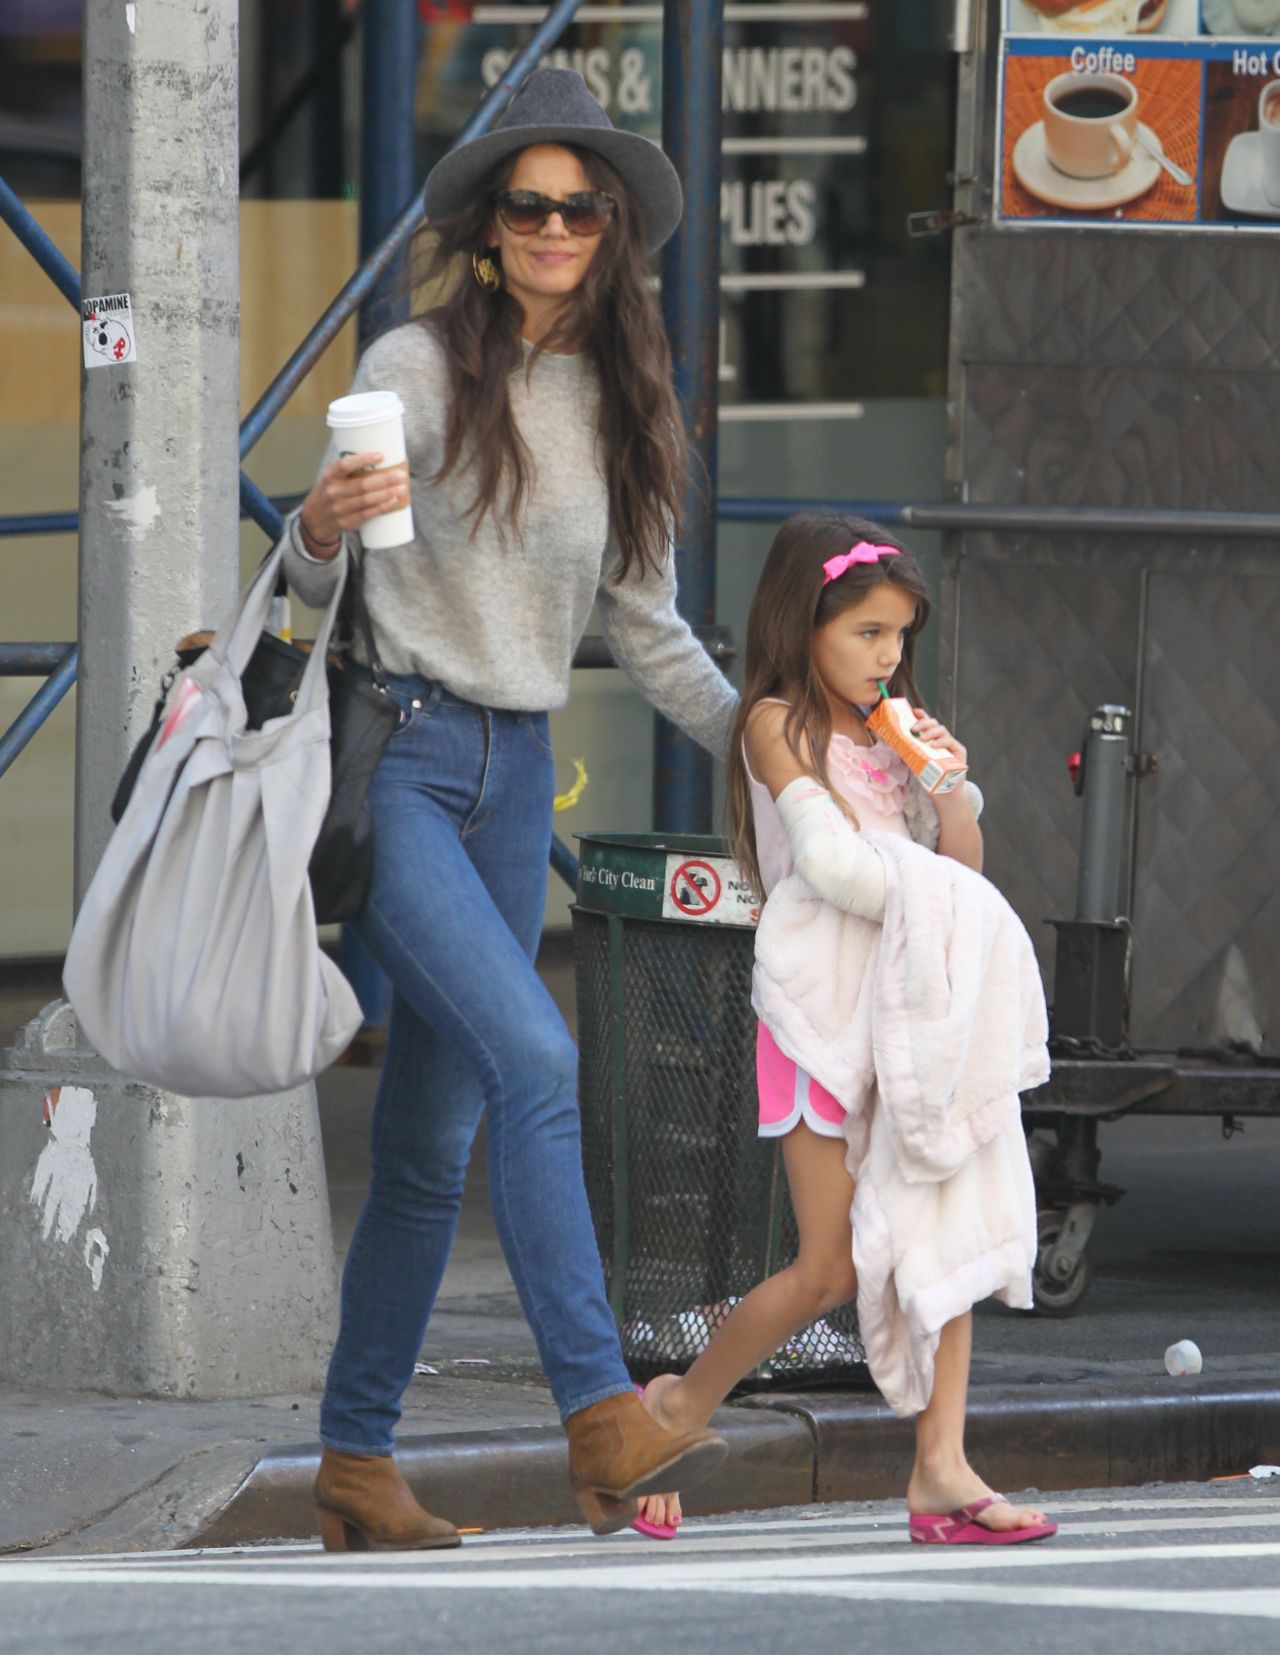 Suri Cruise keeps a strong grip on her juice box and blanket while out with mom Katie Holmes on September 5. 